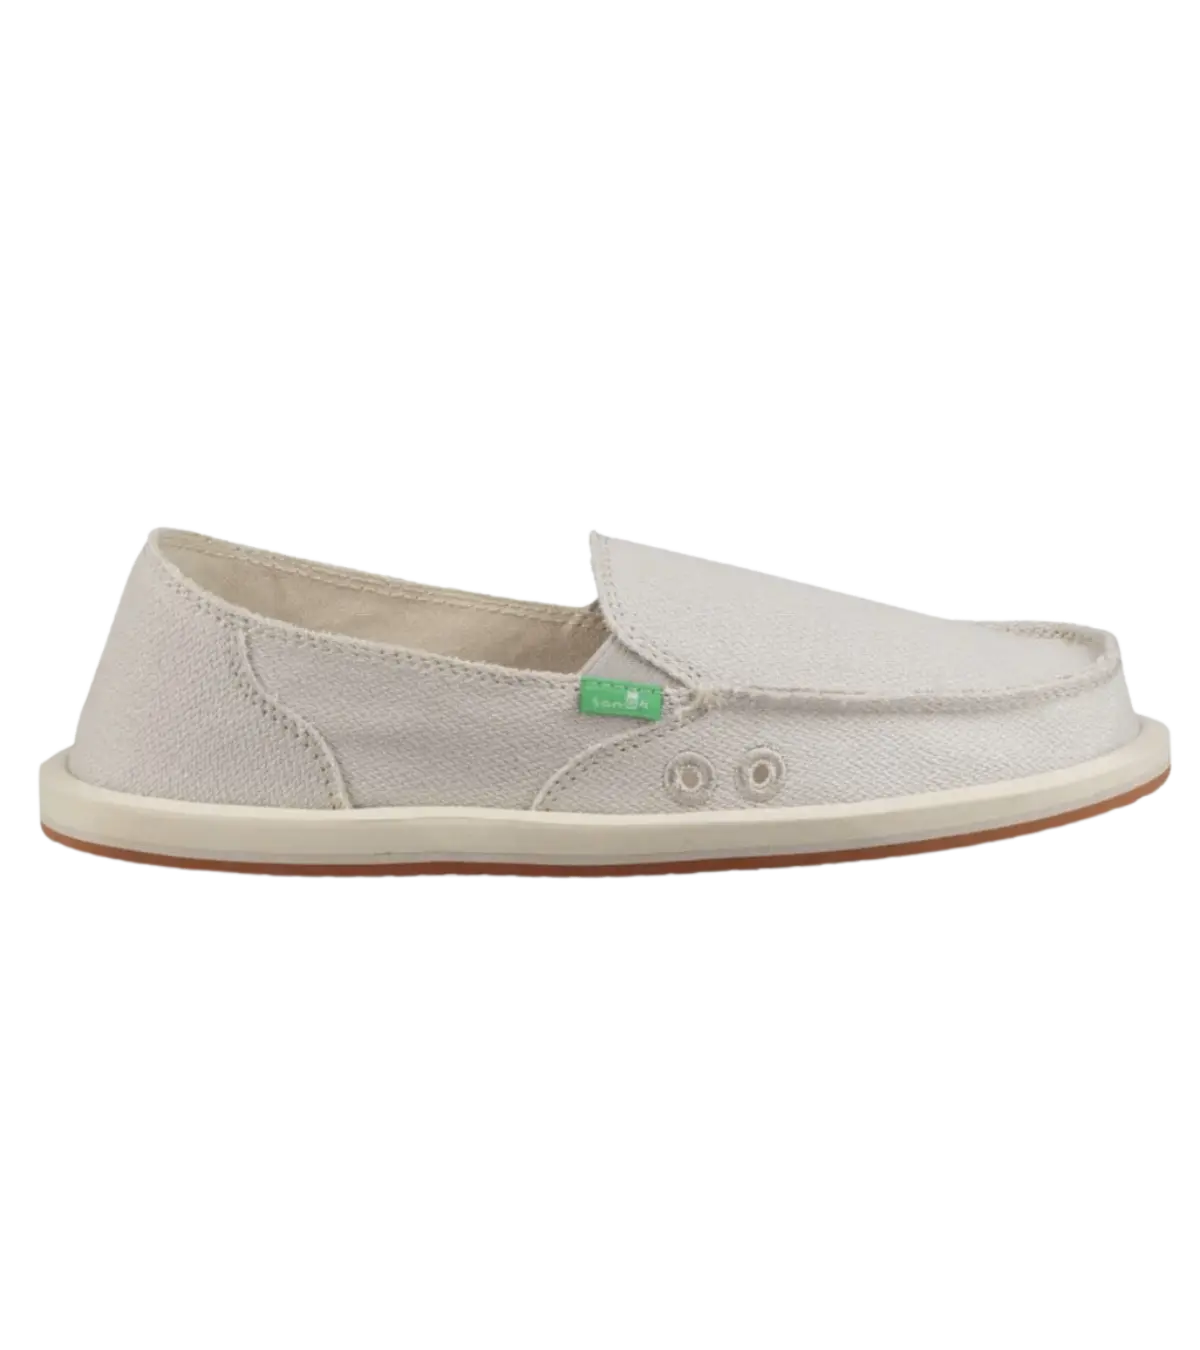 Sanuk Donna Weave Shoe - Women's Shoes in Natural